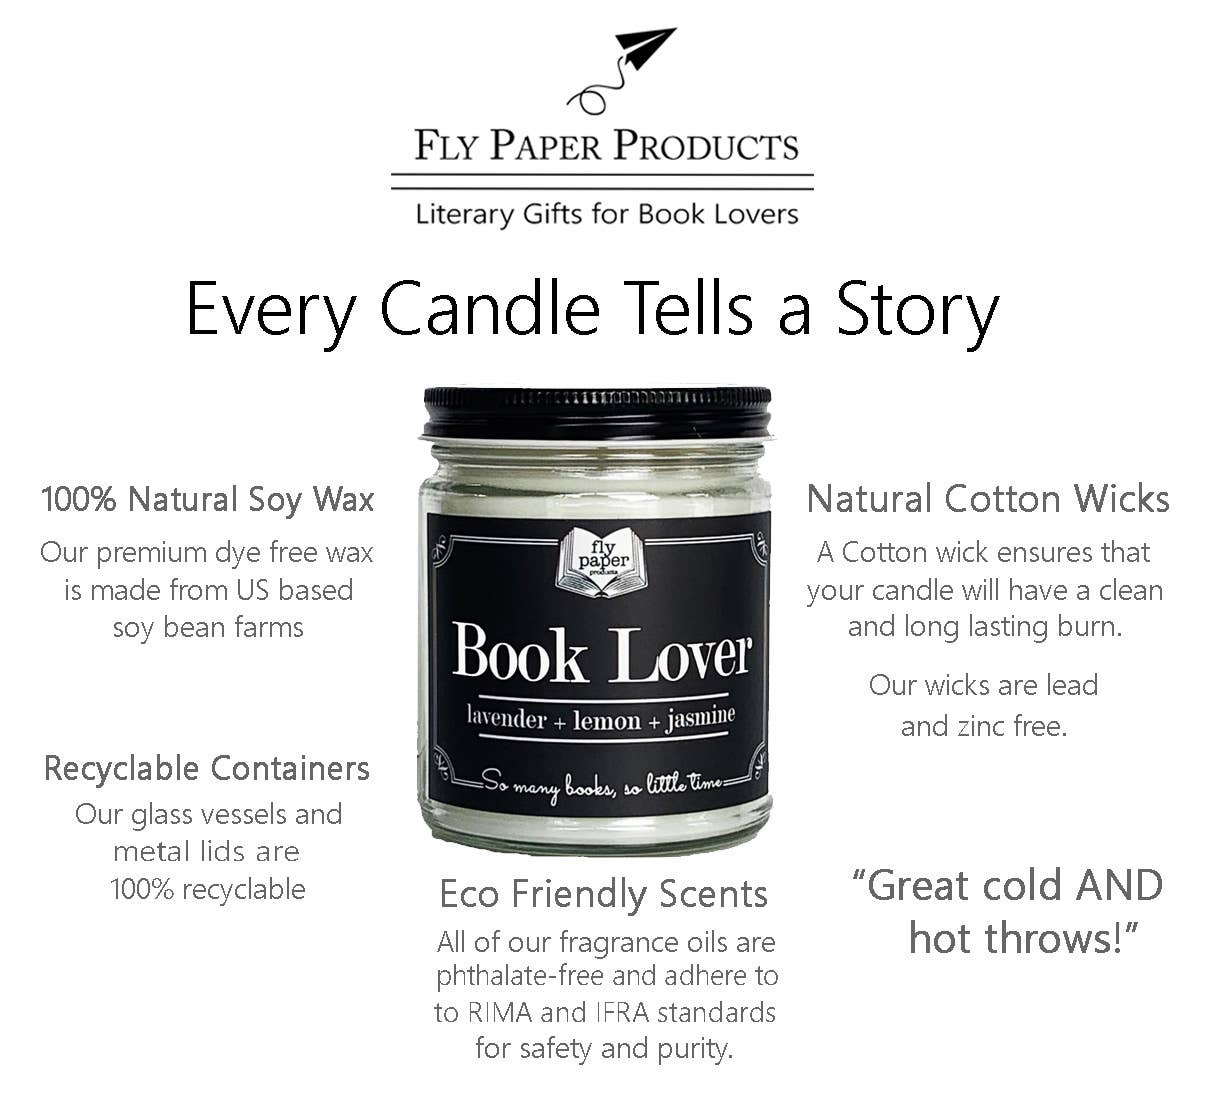 Fly Paper Products - Old Books Scented 9oz Soy Candle Cedar + Leather + Musk